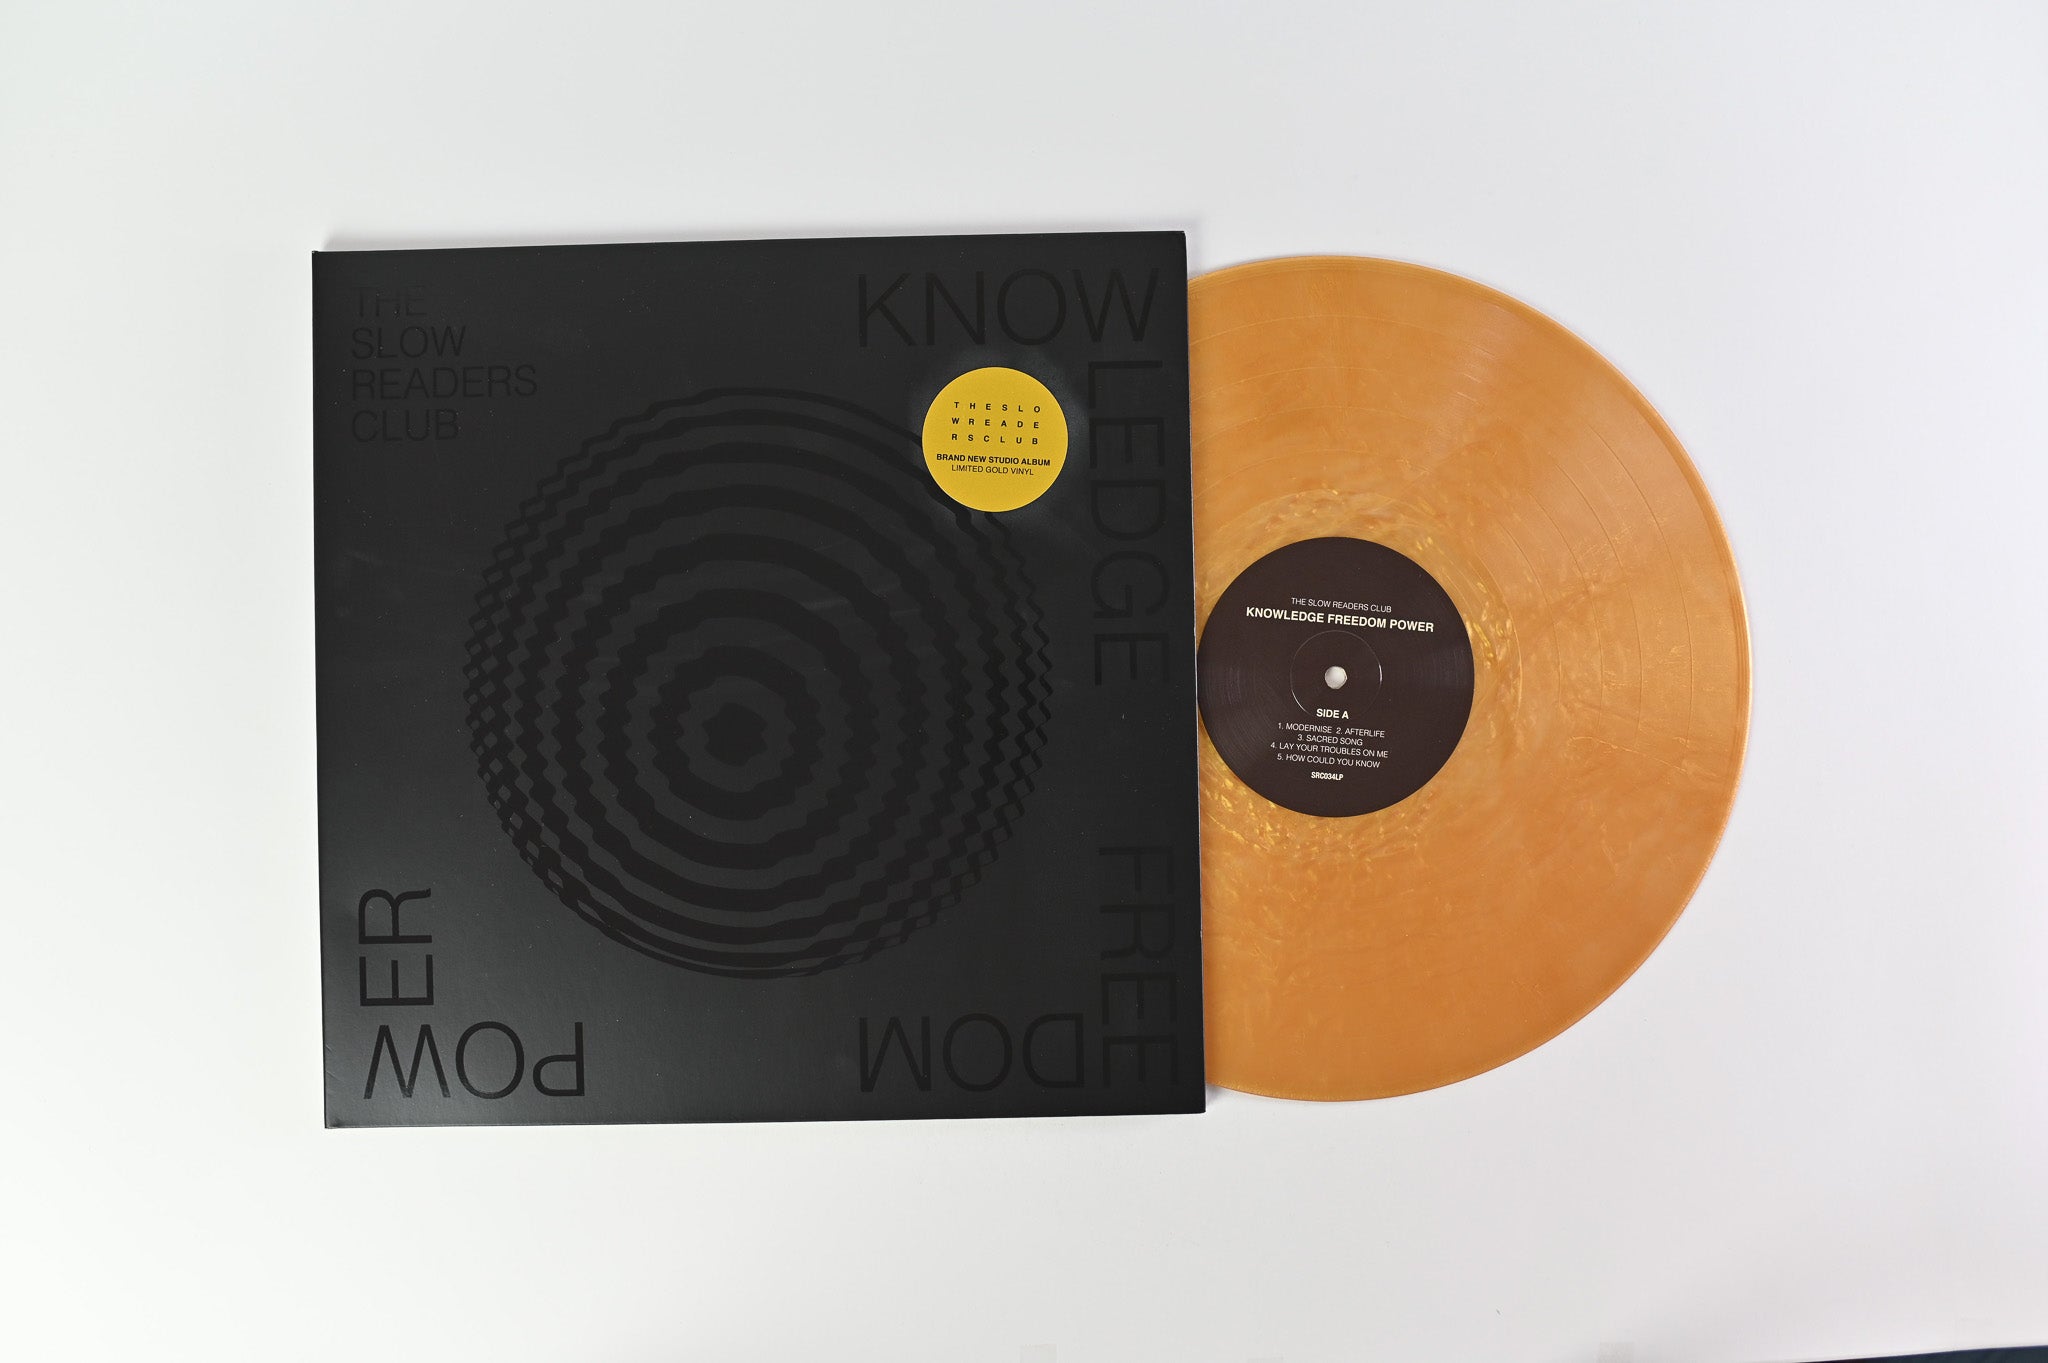 The Slow Readers Club - Knowledge Freedom Power on Velveteen Special Ltd Blackout Edition Gold Vinyl